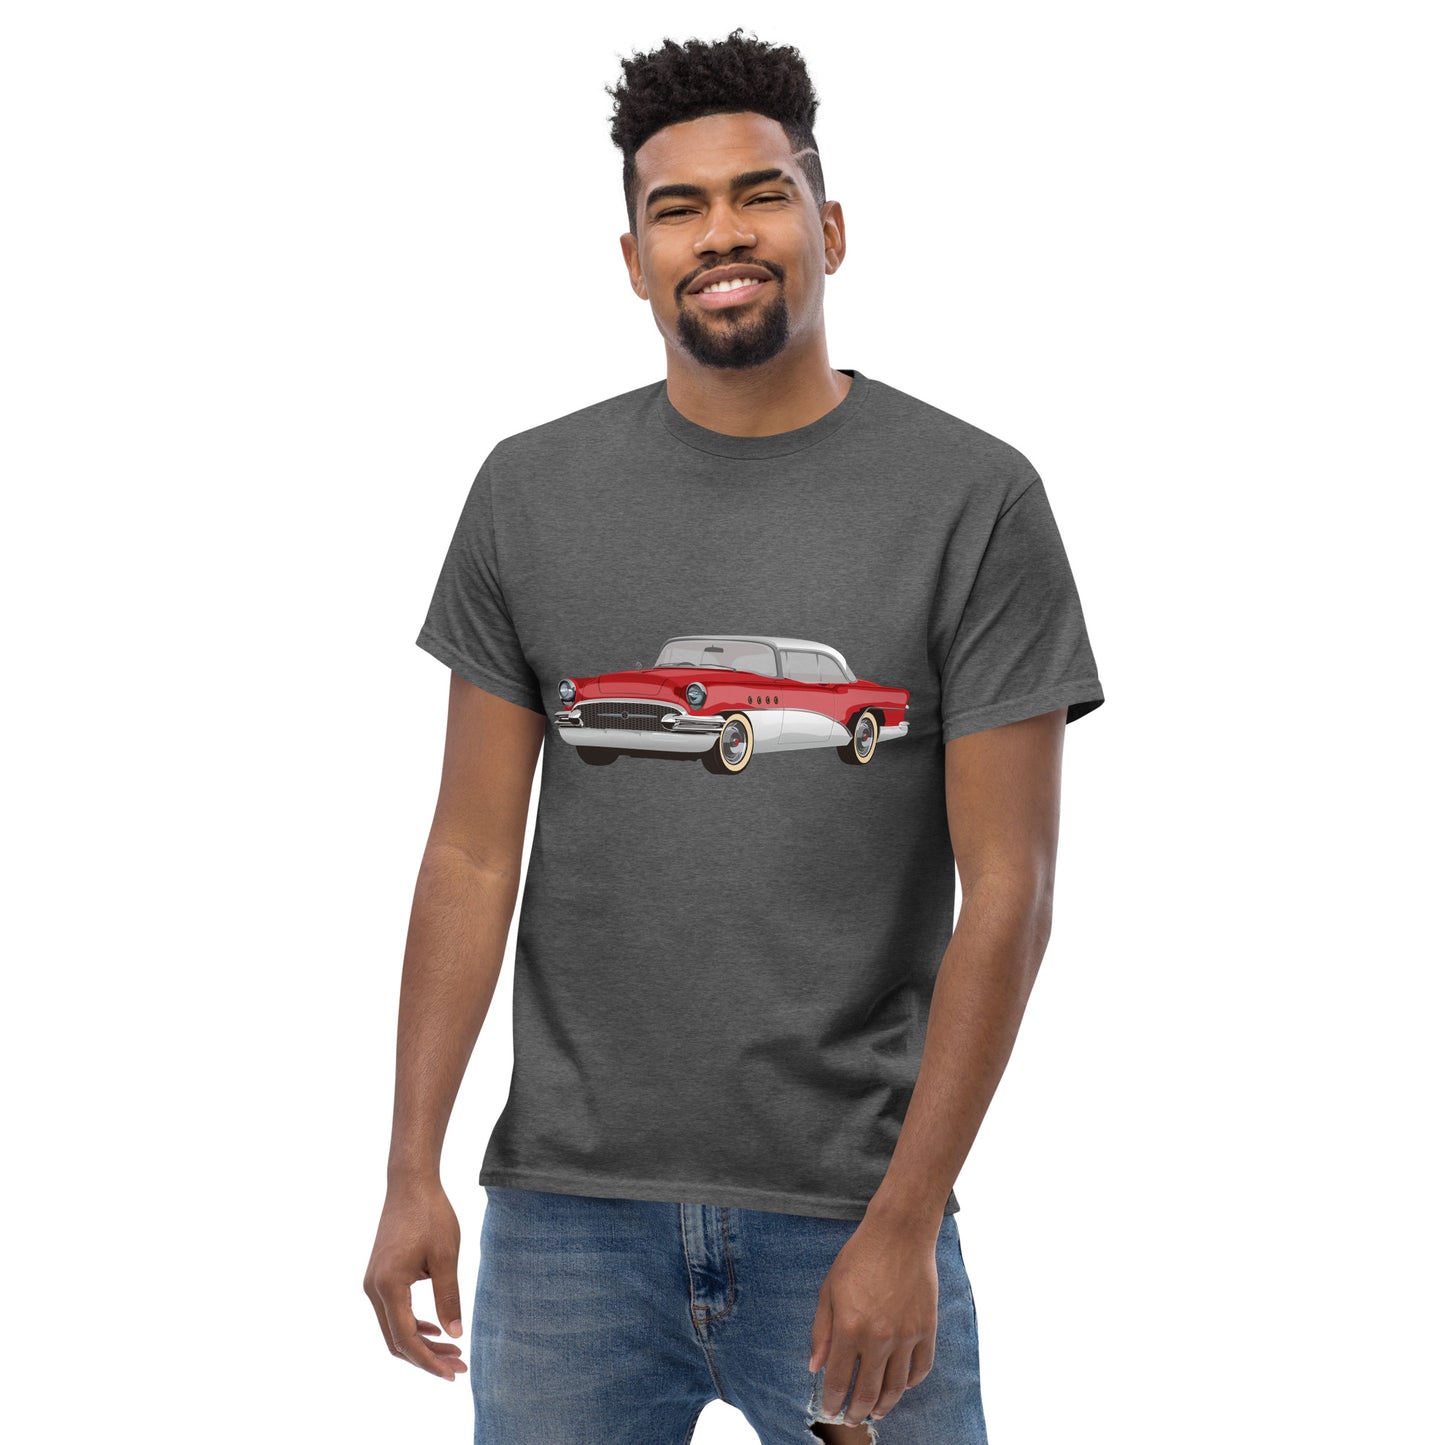 Men with grey t-shirt with red Chevrolet 